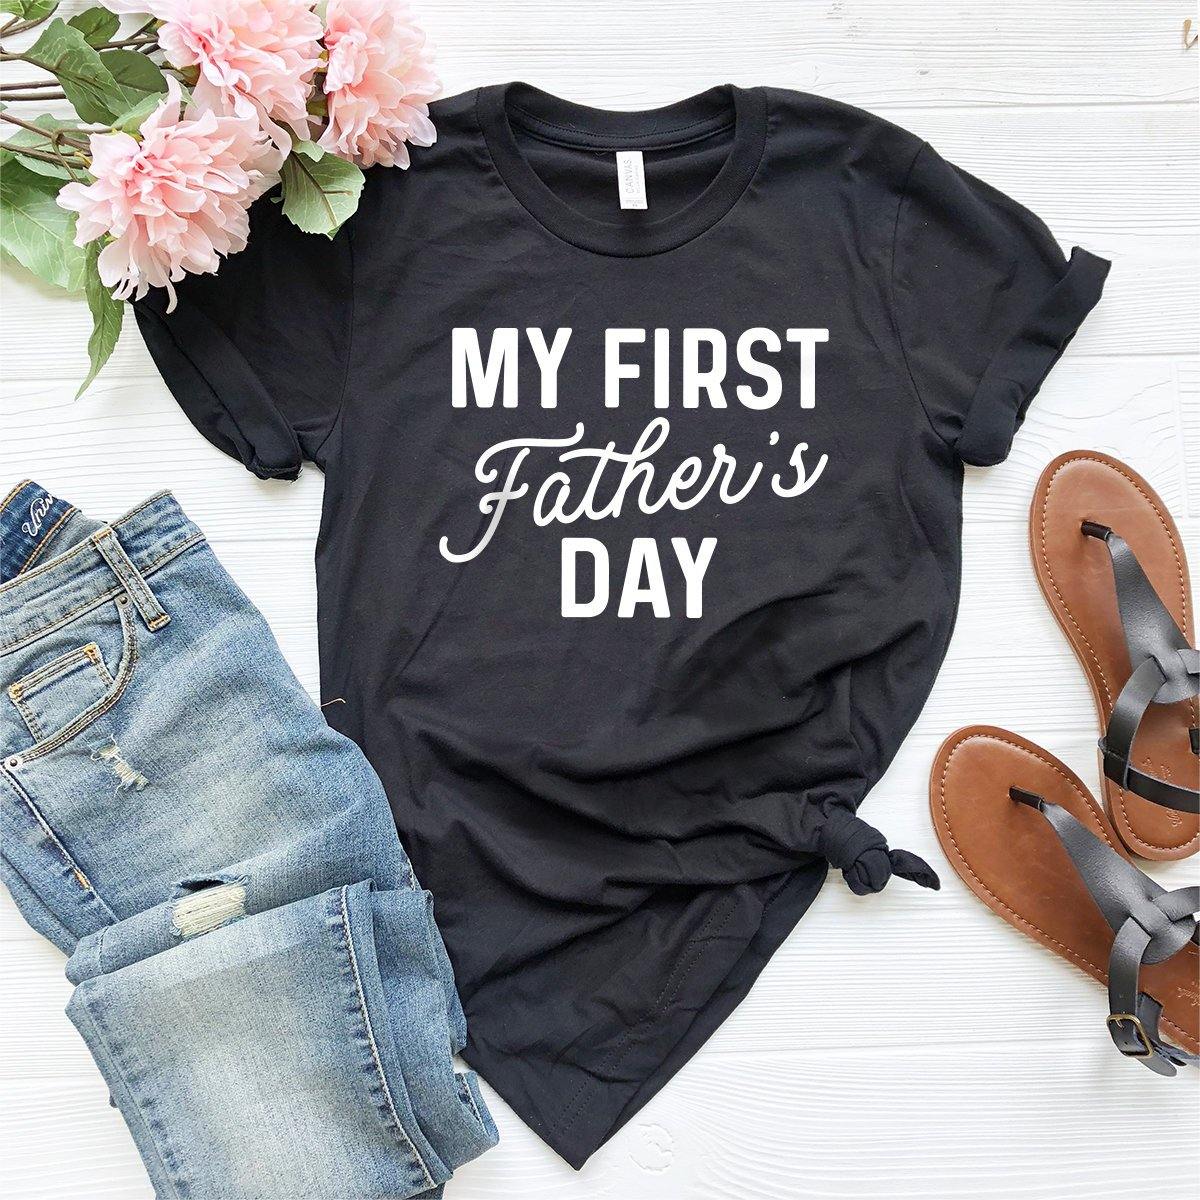 New Dad Shirt, New Dad Gift, Gift For New Dad, Shirt For New Dad, My First Father's Day Shirt, Funny New Dad Tee, New Dad Fathers Day Shirt - Fastdeliverytees.com